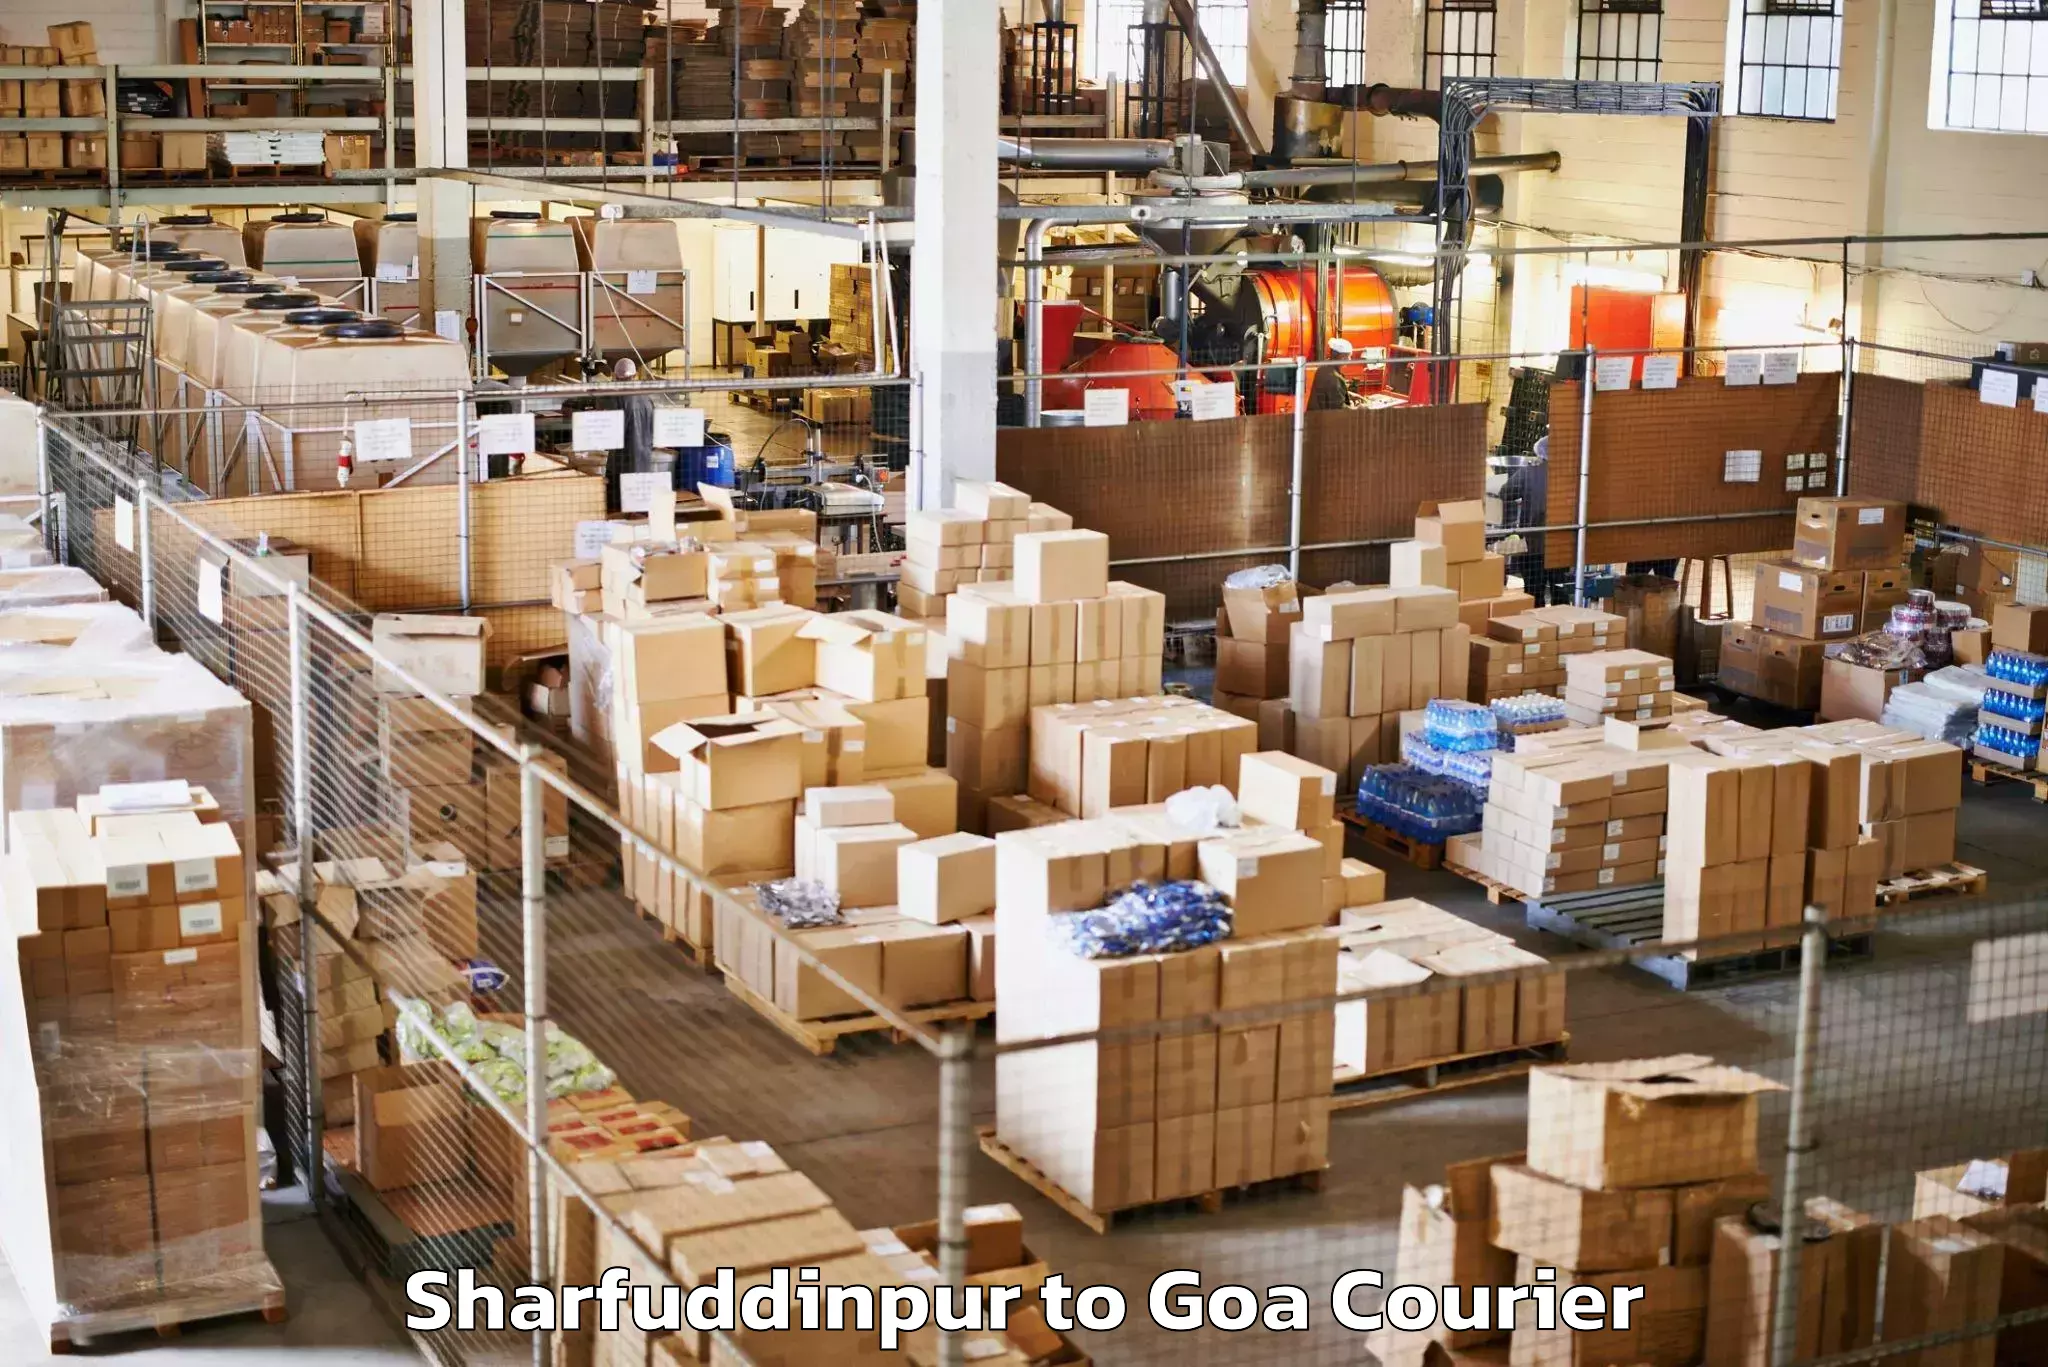 Luggage transport consulting in Sharfuddinpur to Panaji